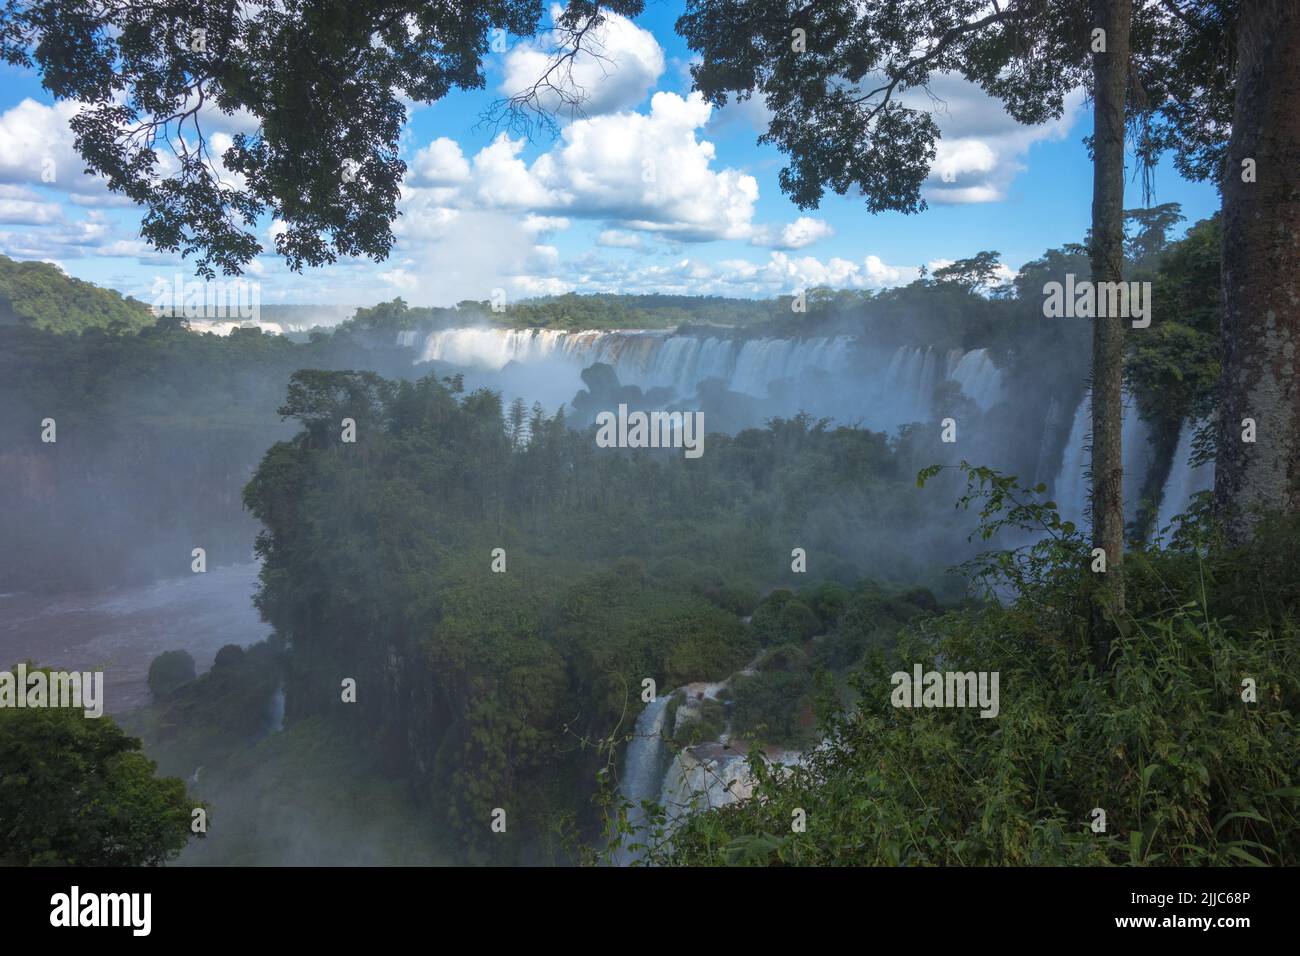 Huge beautiful panorama view from Iguazu Fall, Catarata Argentine Side blue sky green forest murky waters of Iguazu river strong current. Stock Photo